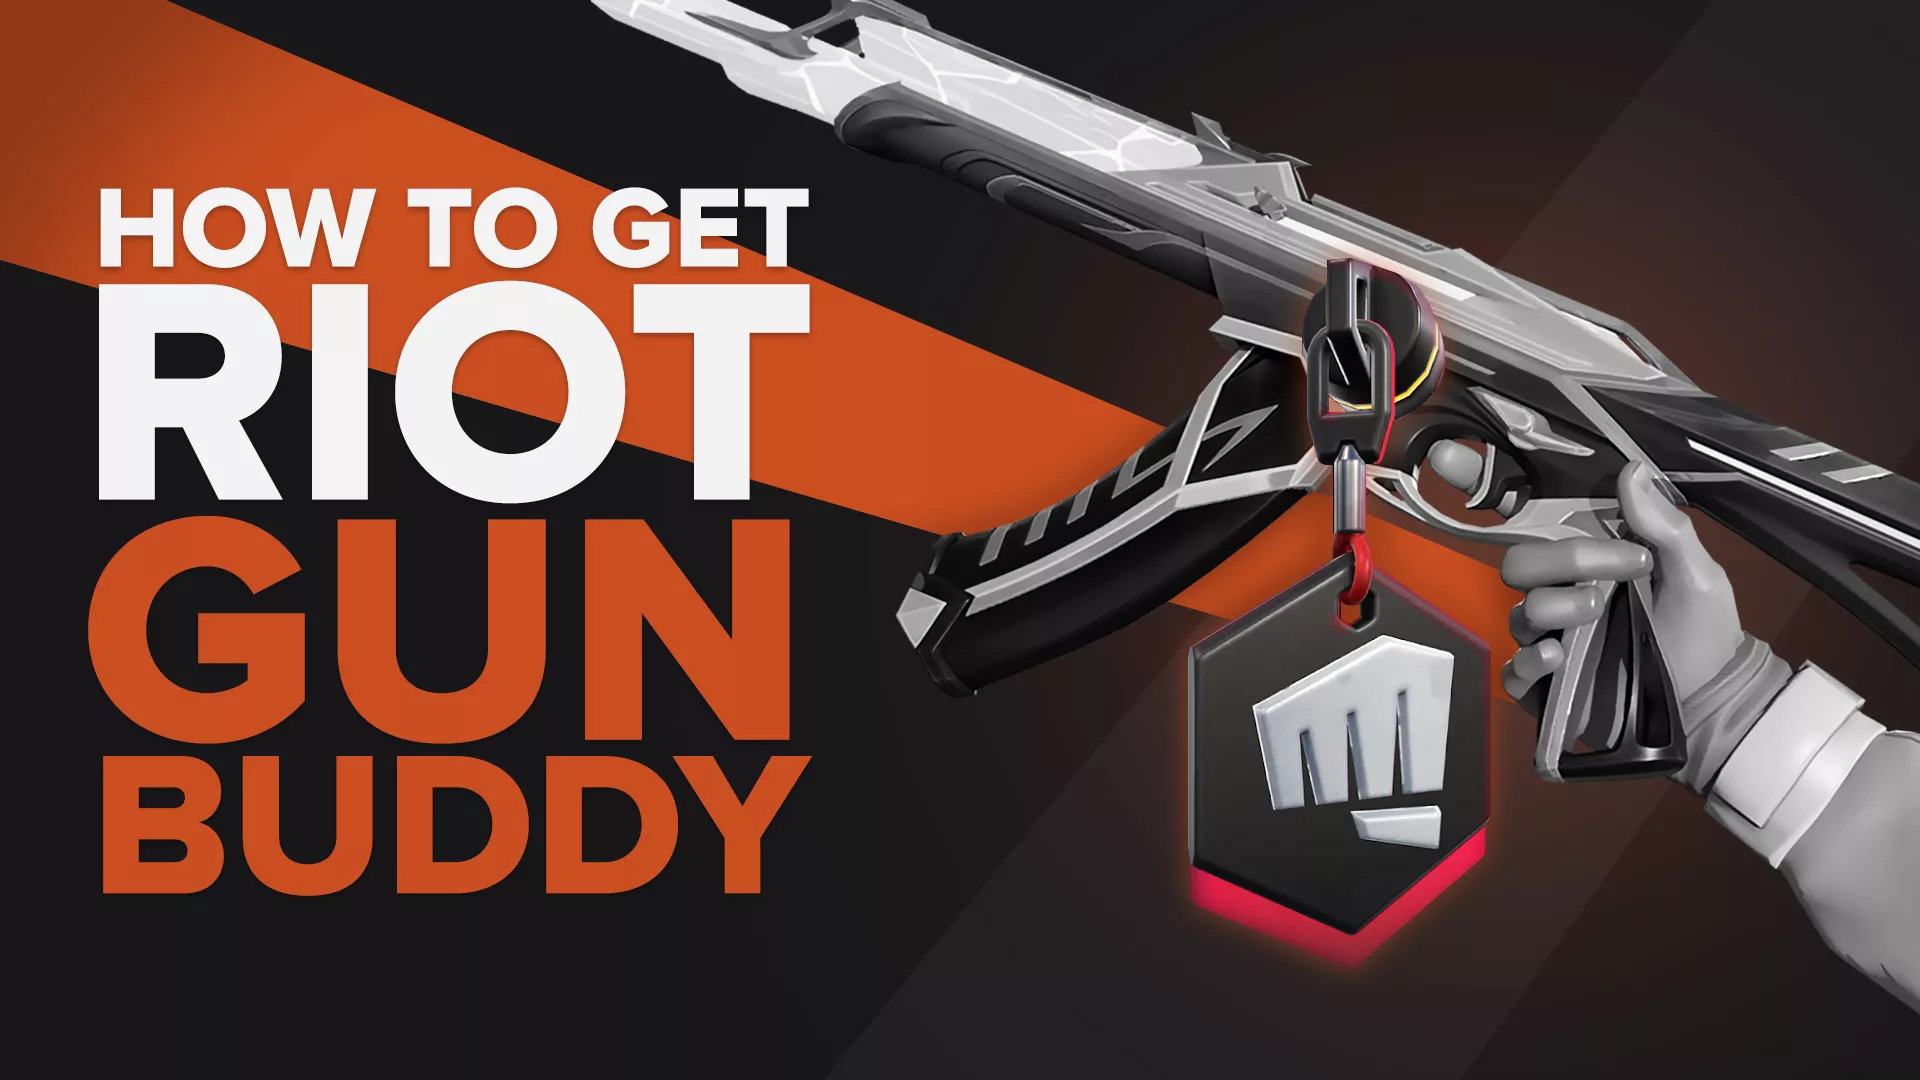 How to Get the Riot Gun Buddy in Valorant